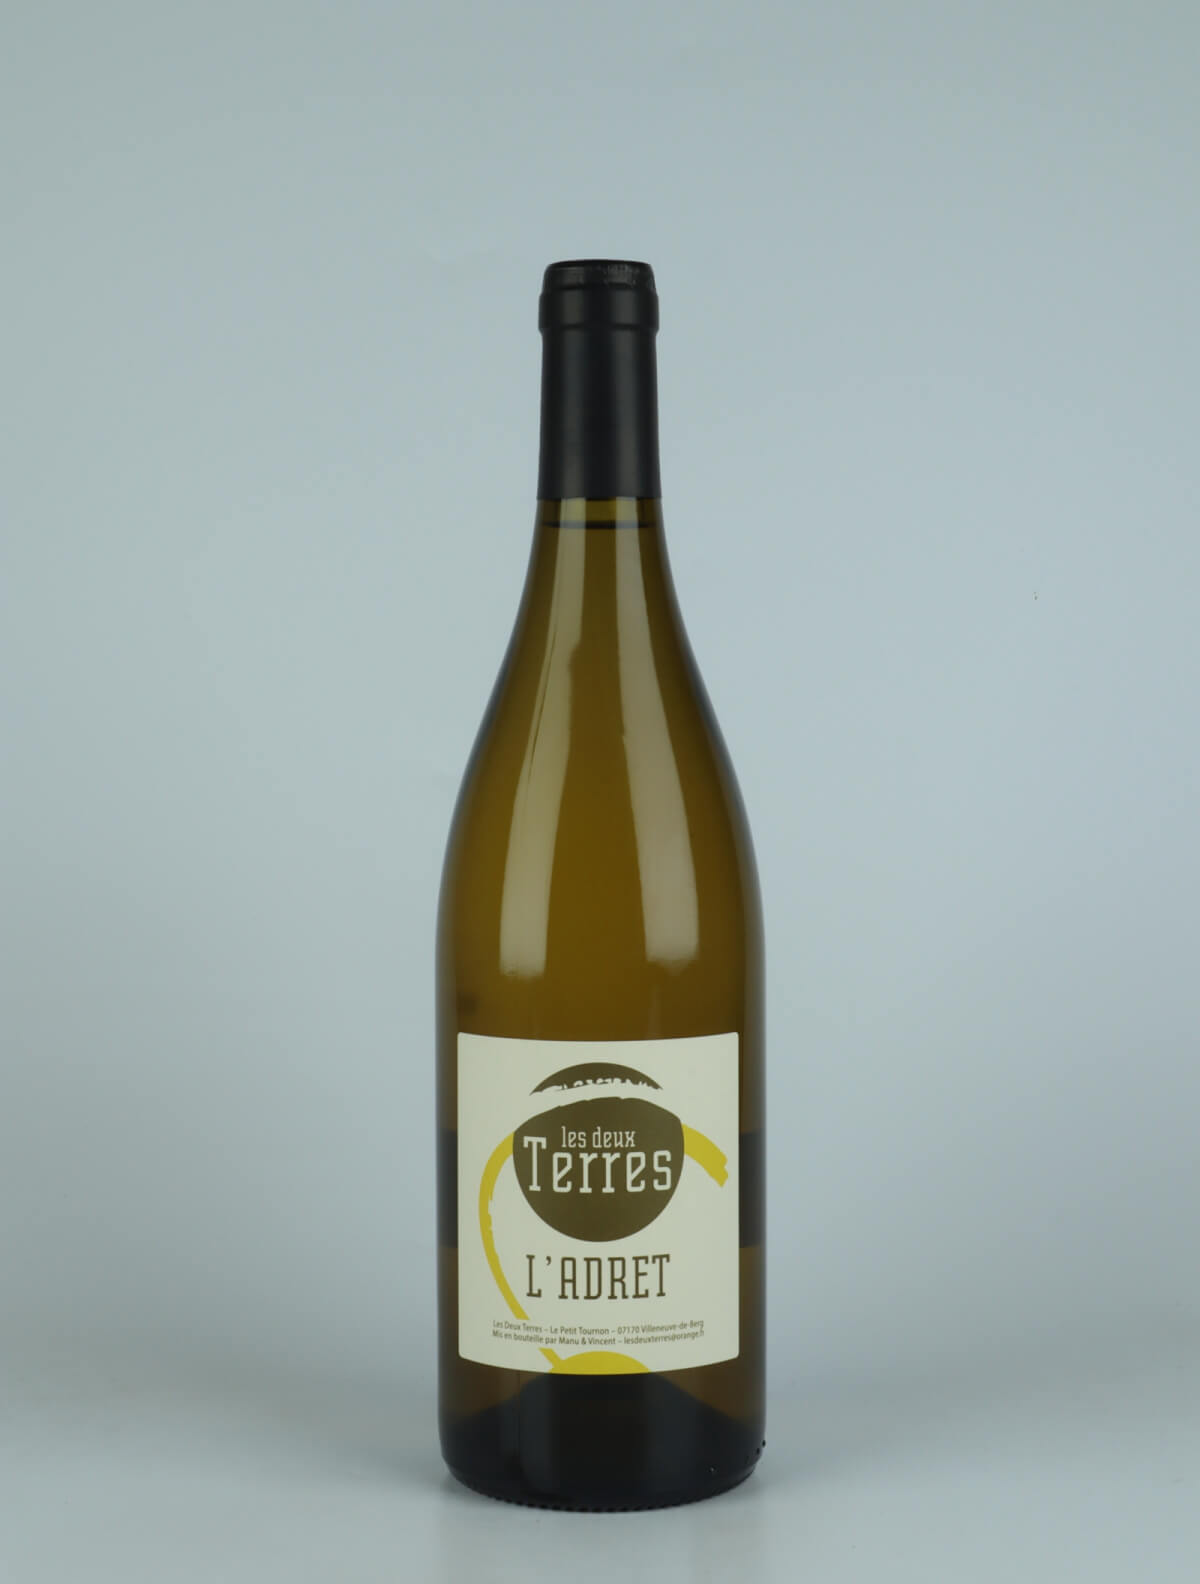 A bottle 2022 Adret White wine from Les Deux Terres, Ardèche in France